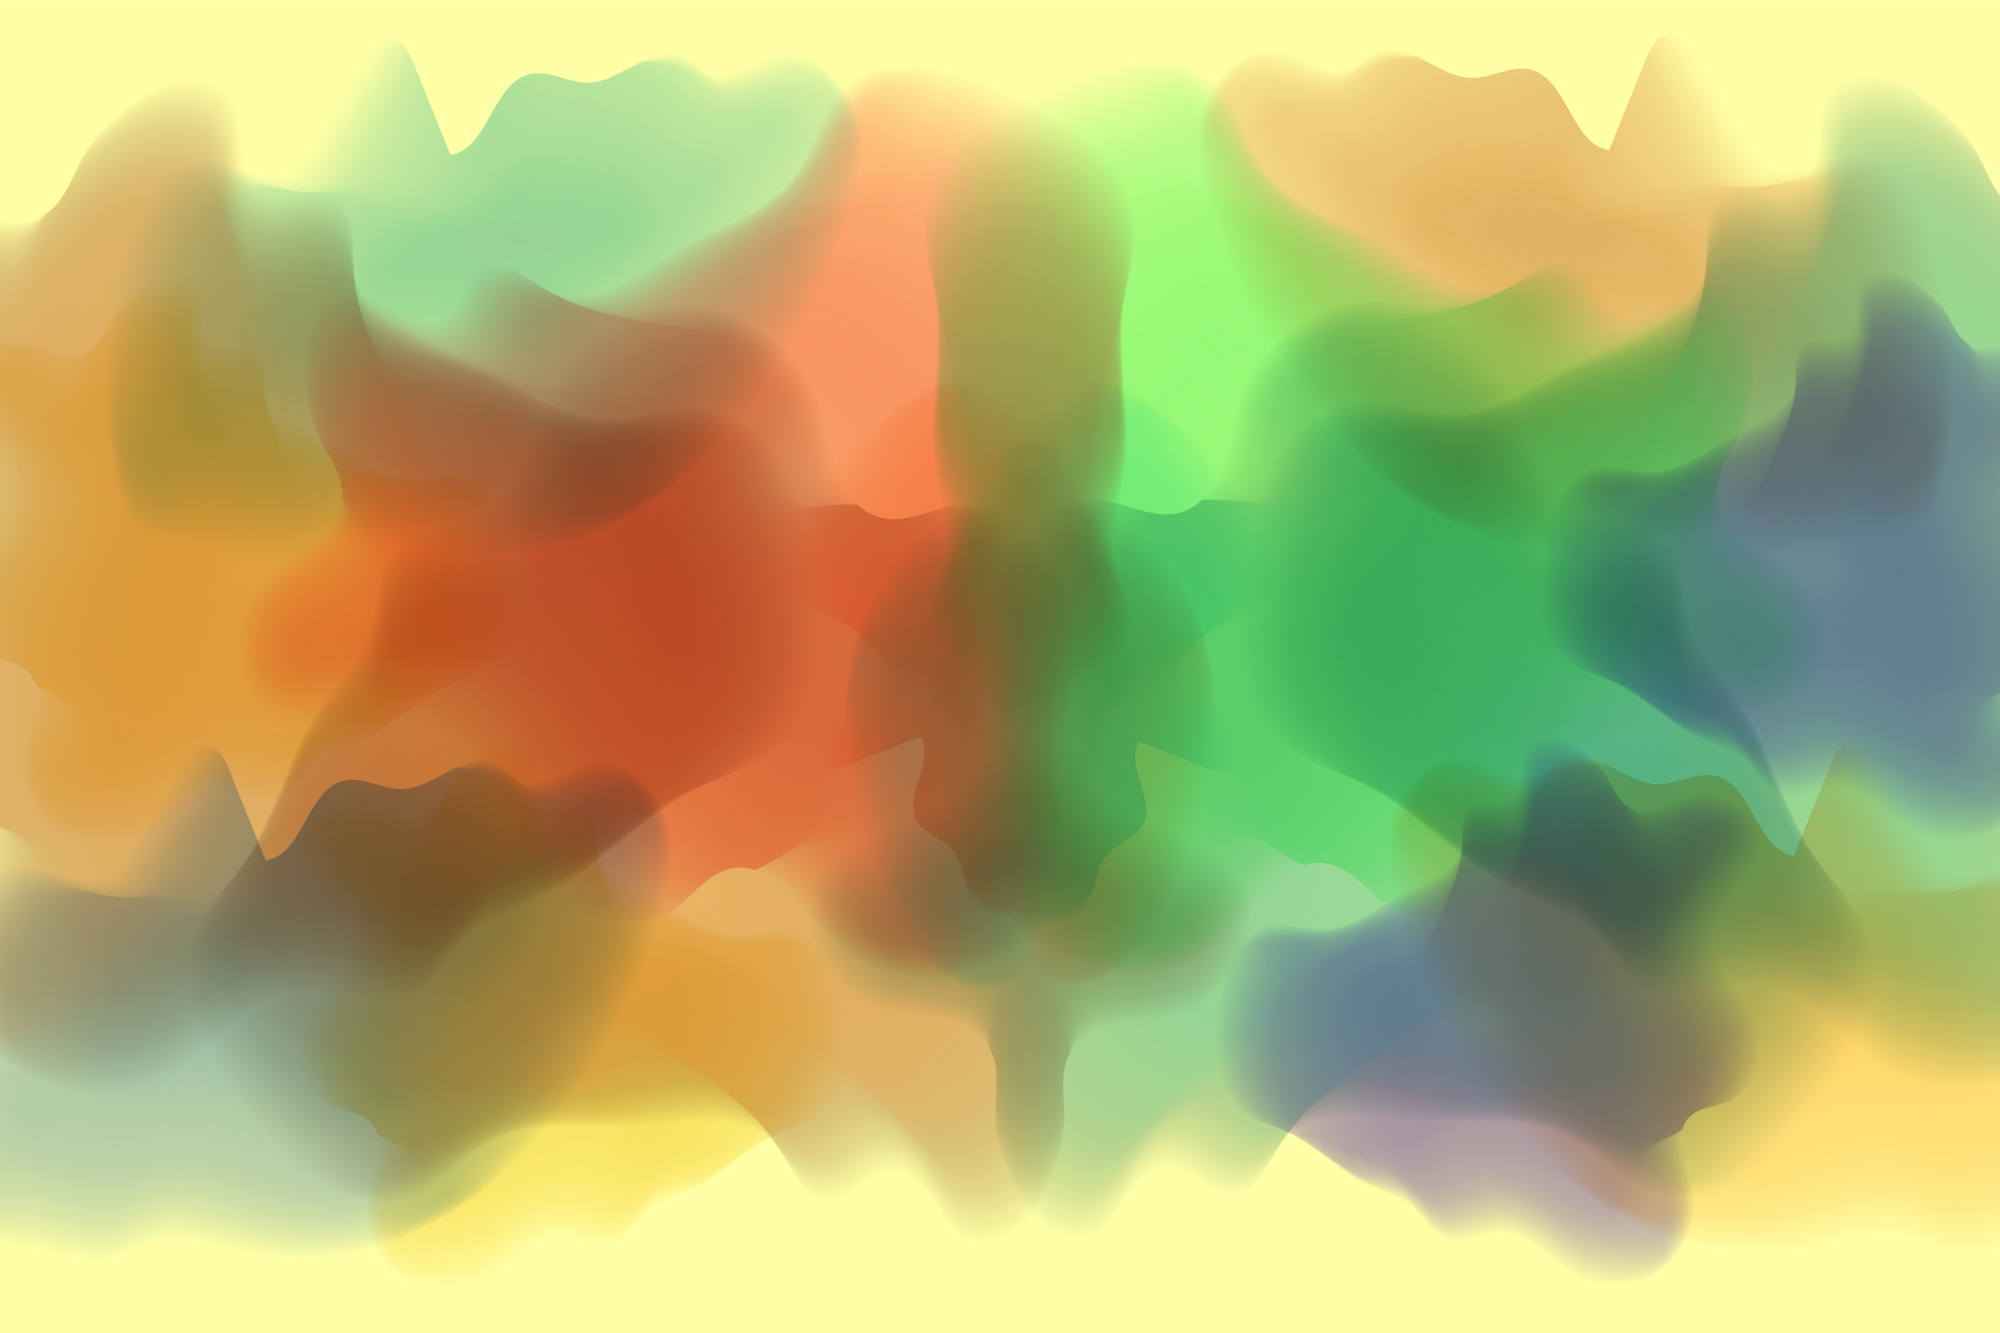 Blurry image of a multicolored background.